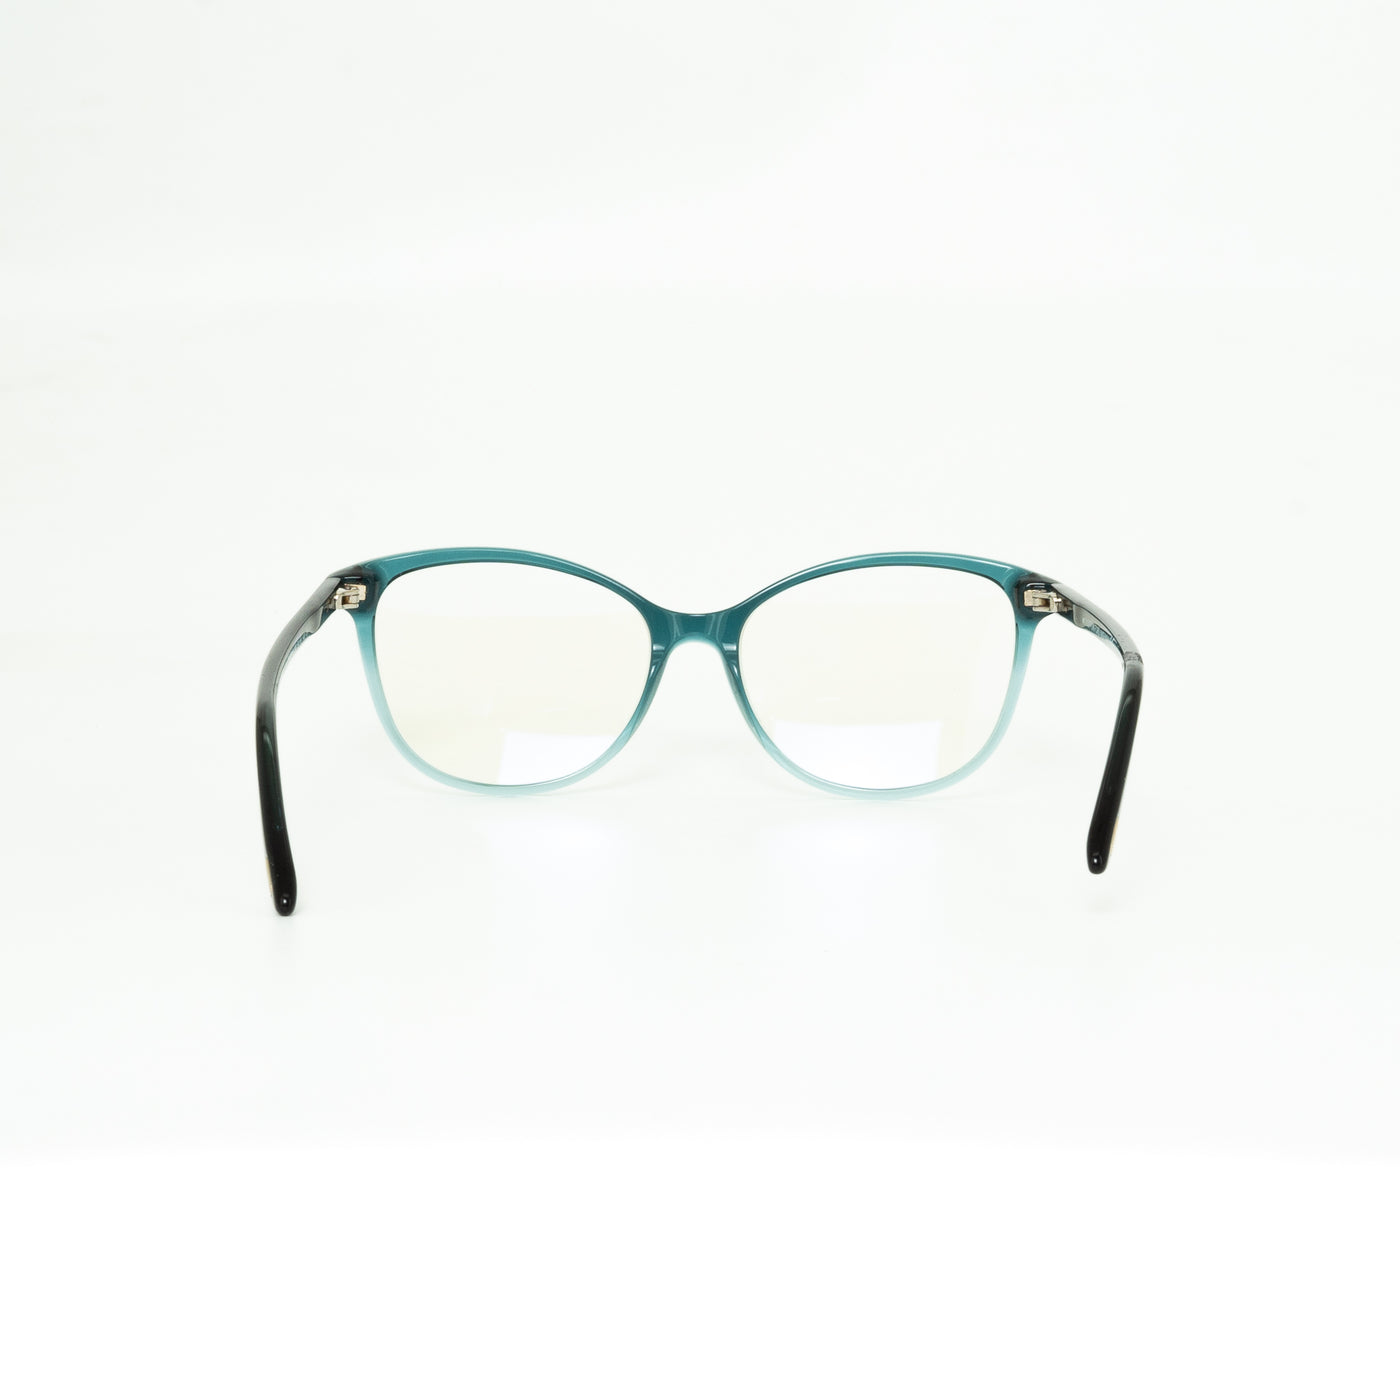 Tom Ford FT5576B08954 | Eyeglasses - Vision Express Optical Philippines